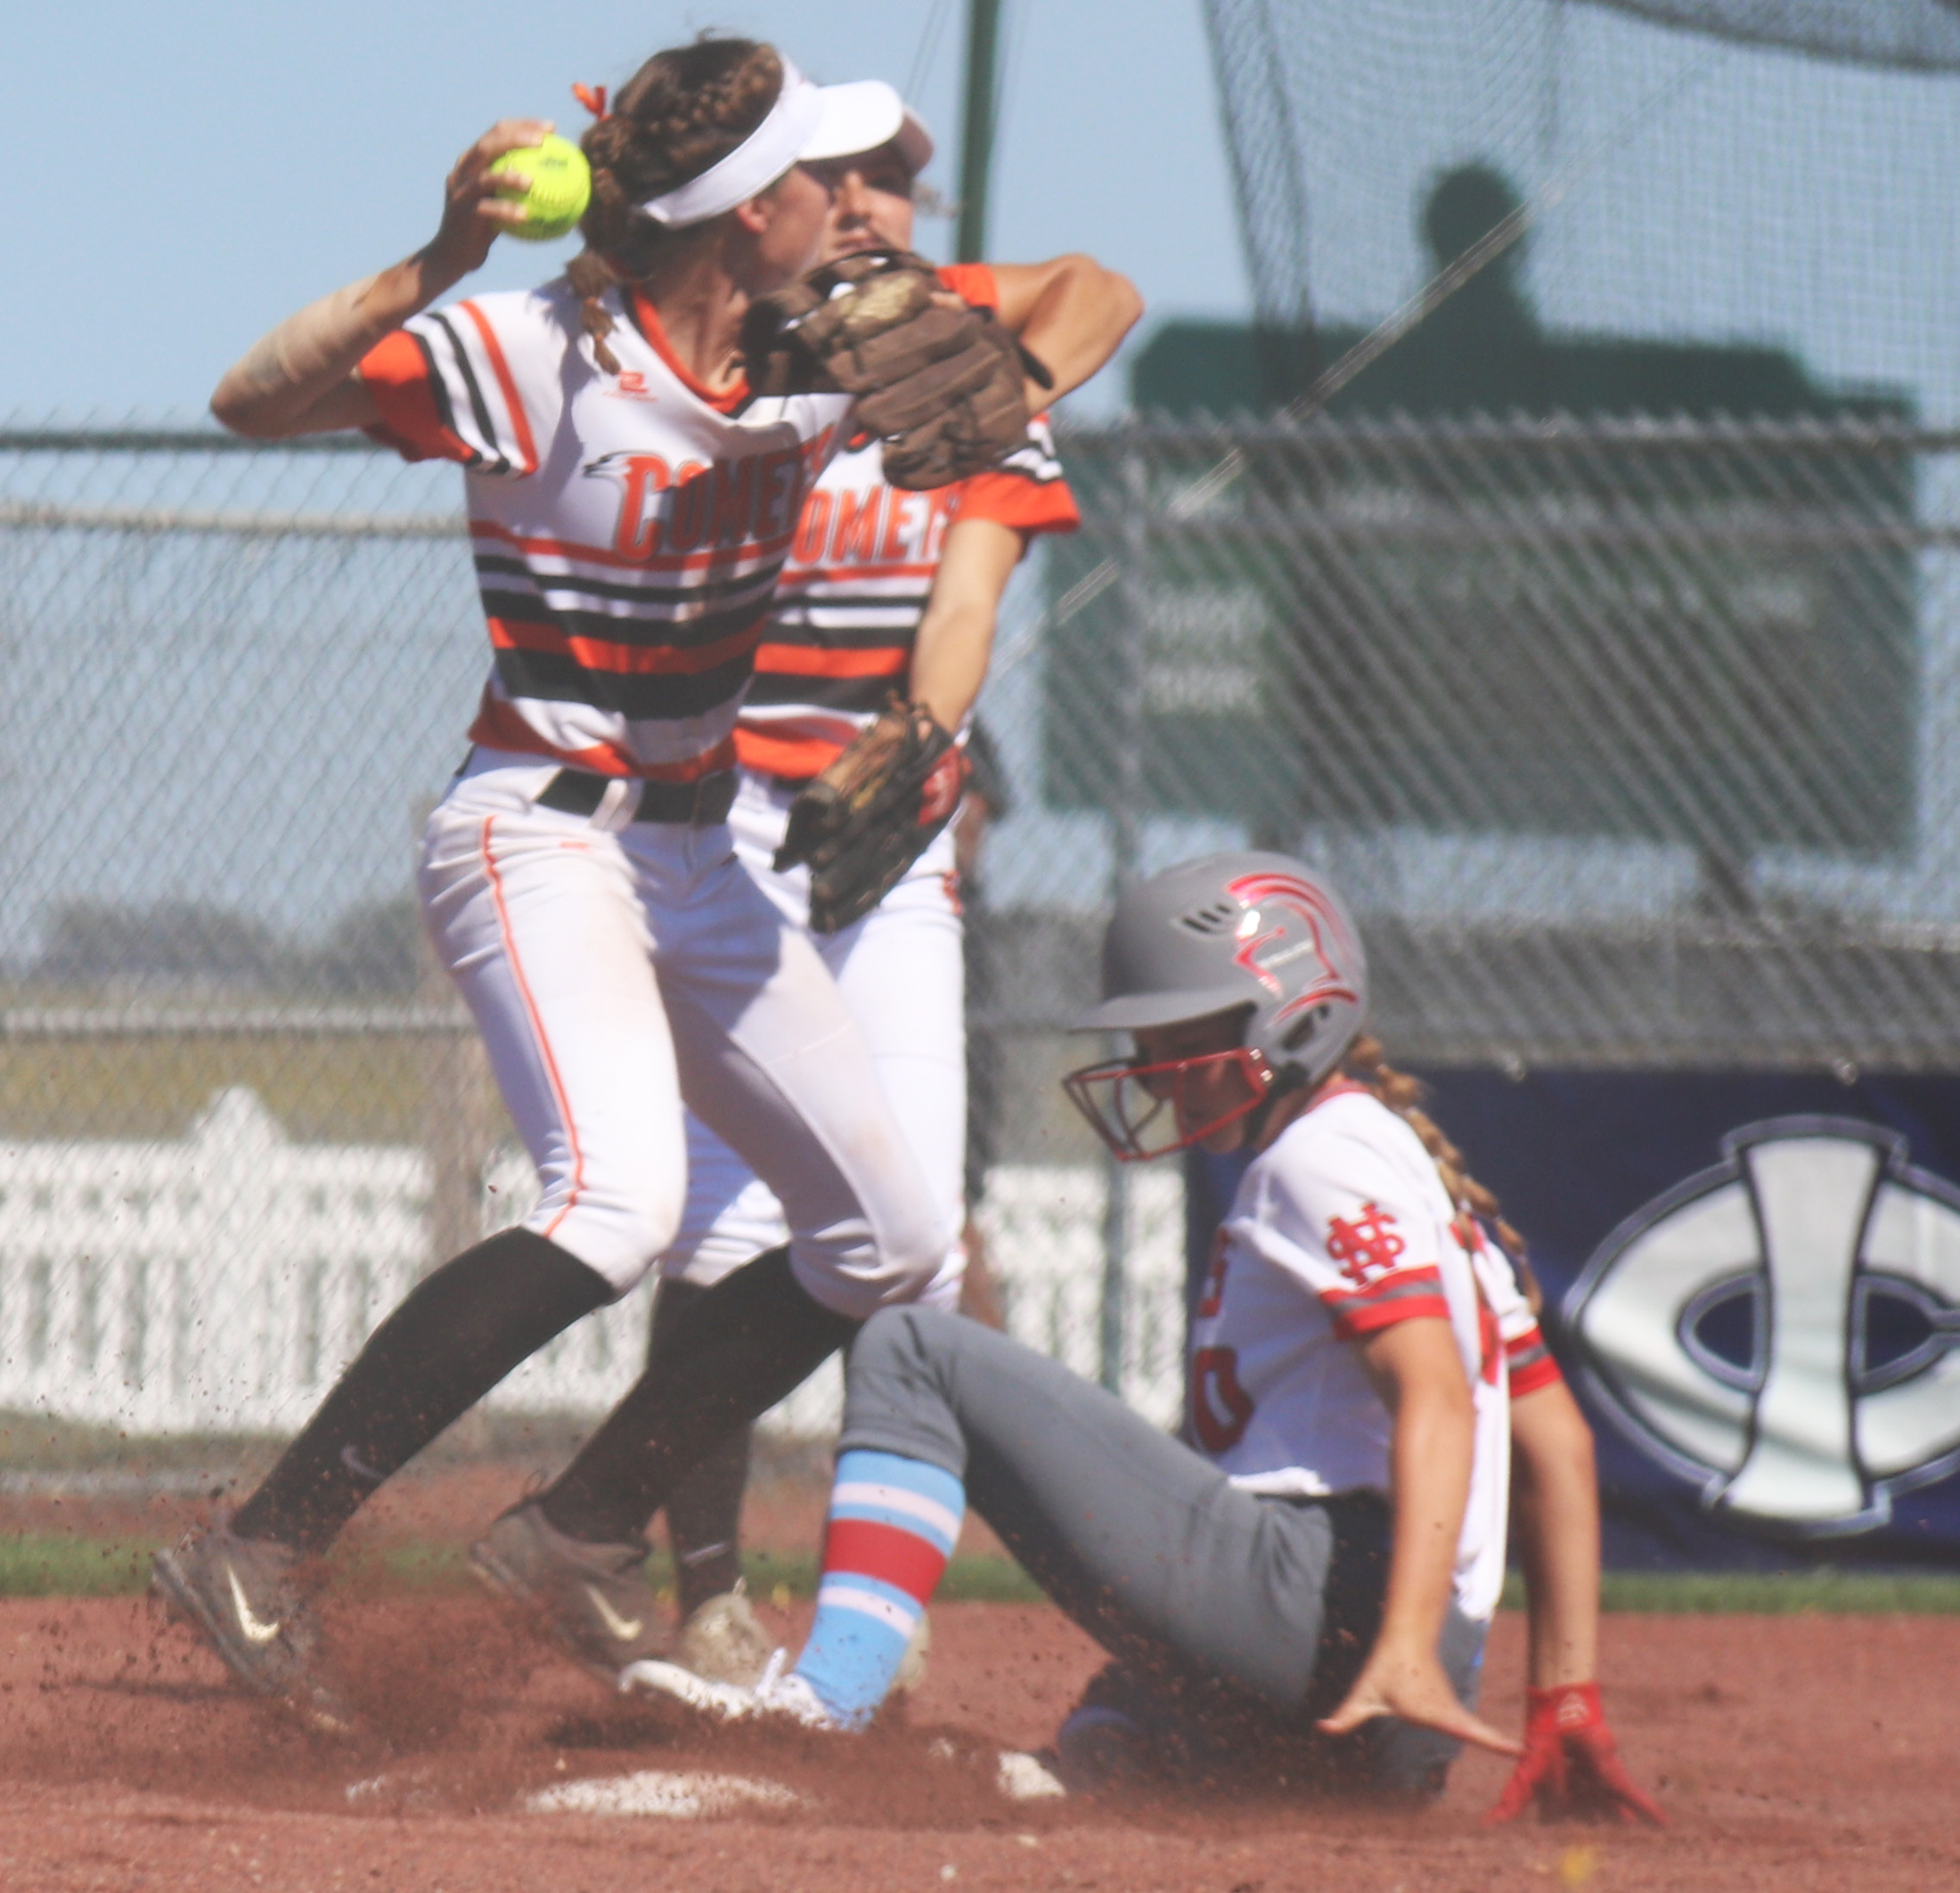 Lancers defeat Comets 11-0 in Class 4A State Softball quarterfinals